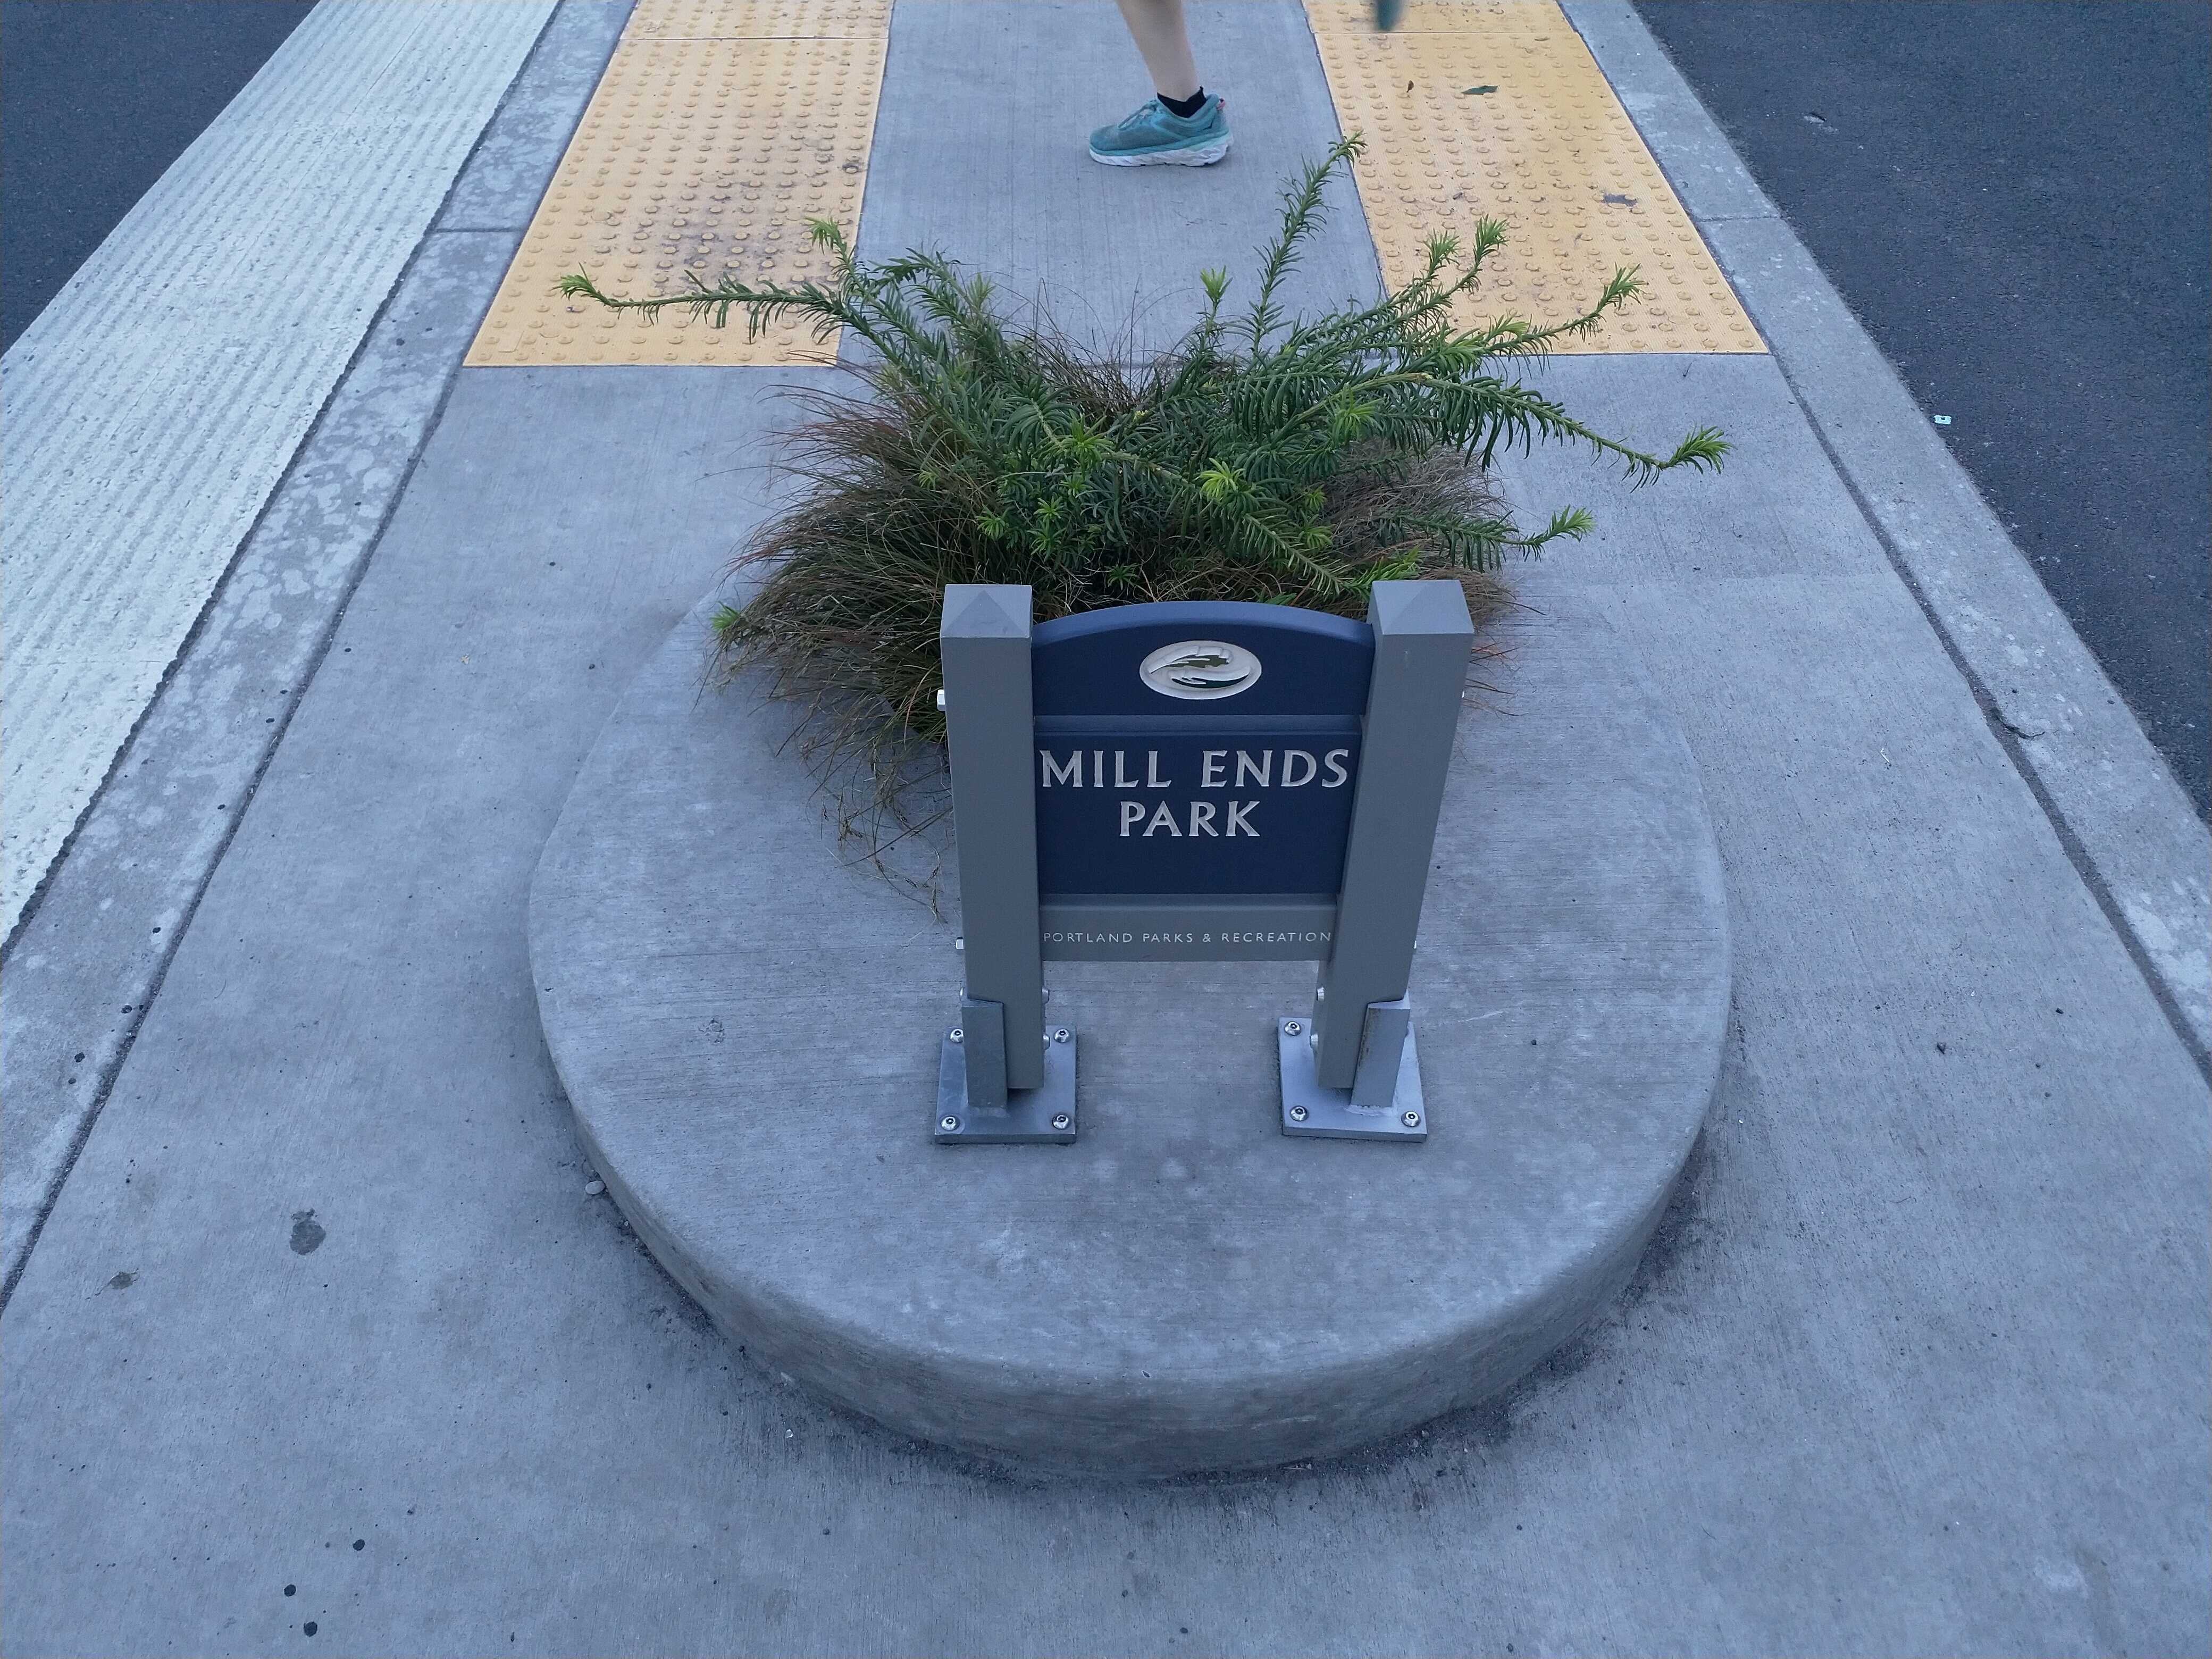 The world&rsquo;s smallest park: Mill Ends Park.